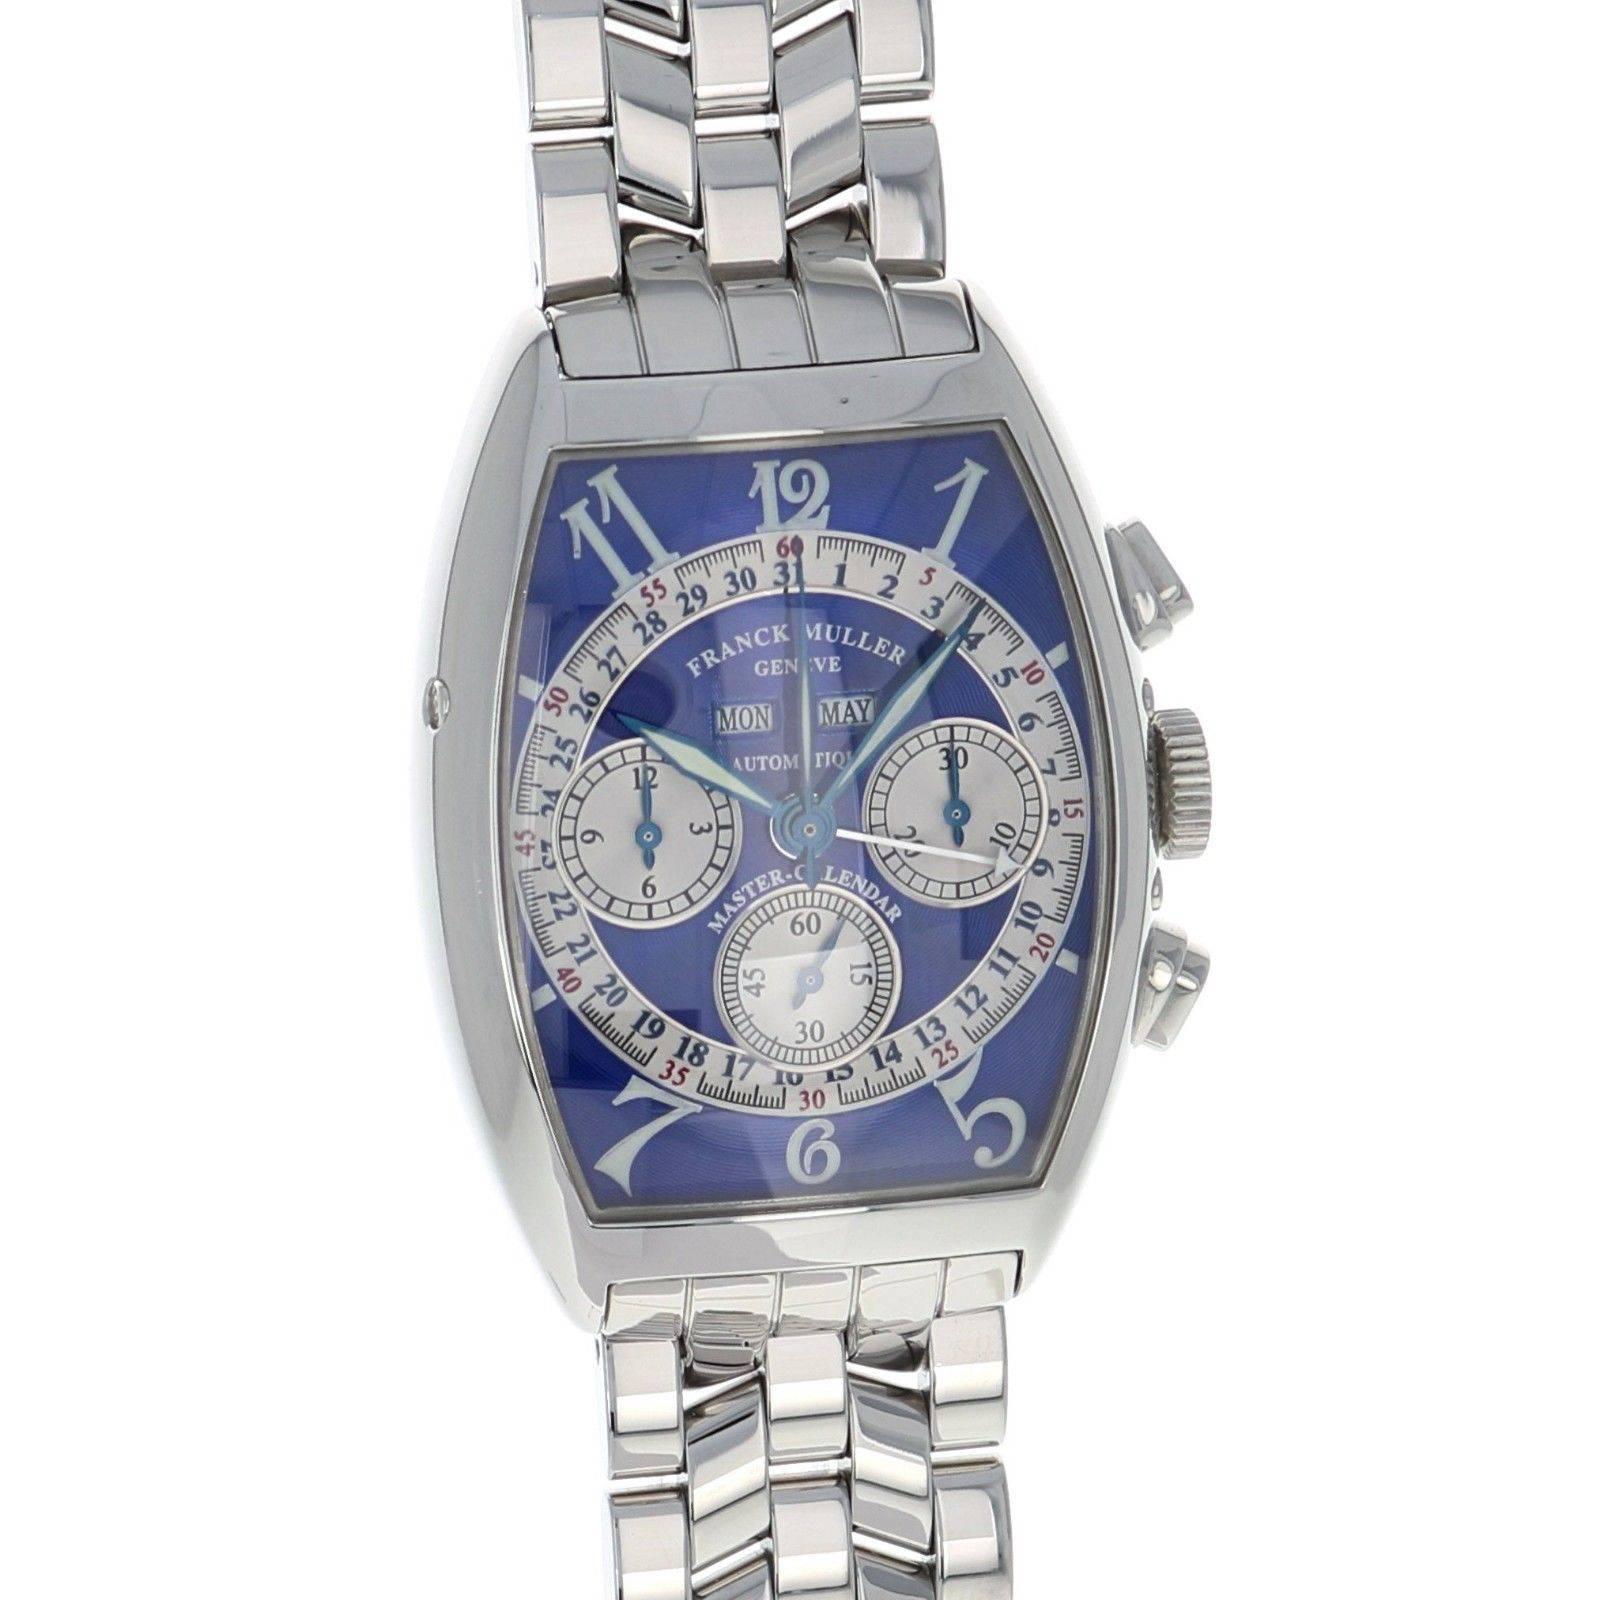 Brand Name  Franck Muller 
Style Number  6850 CC MC AT  
Also Called  6850 
Series  Master Calendar Chronograph 
Gender  Men's 
Case Material  Stainless Steel  
Dial Color  Blue
Movement  Automatic 
Engine  Cal. 1188 
Functions  Hours, Minutes,